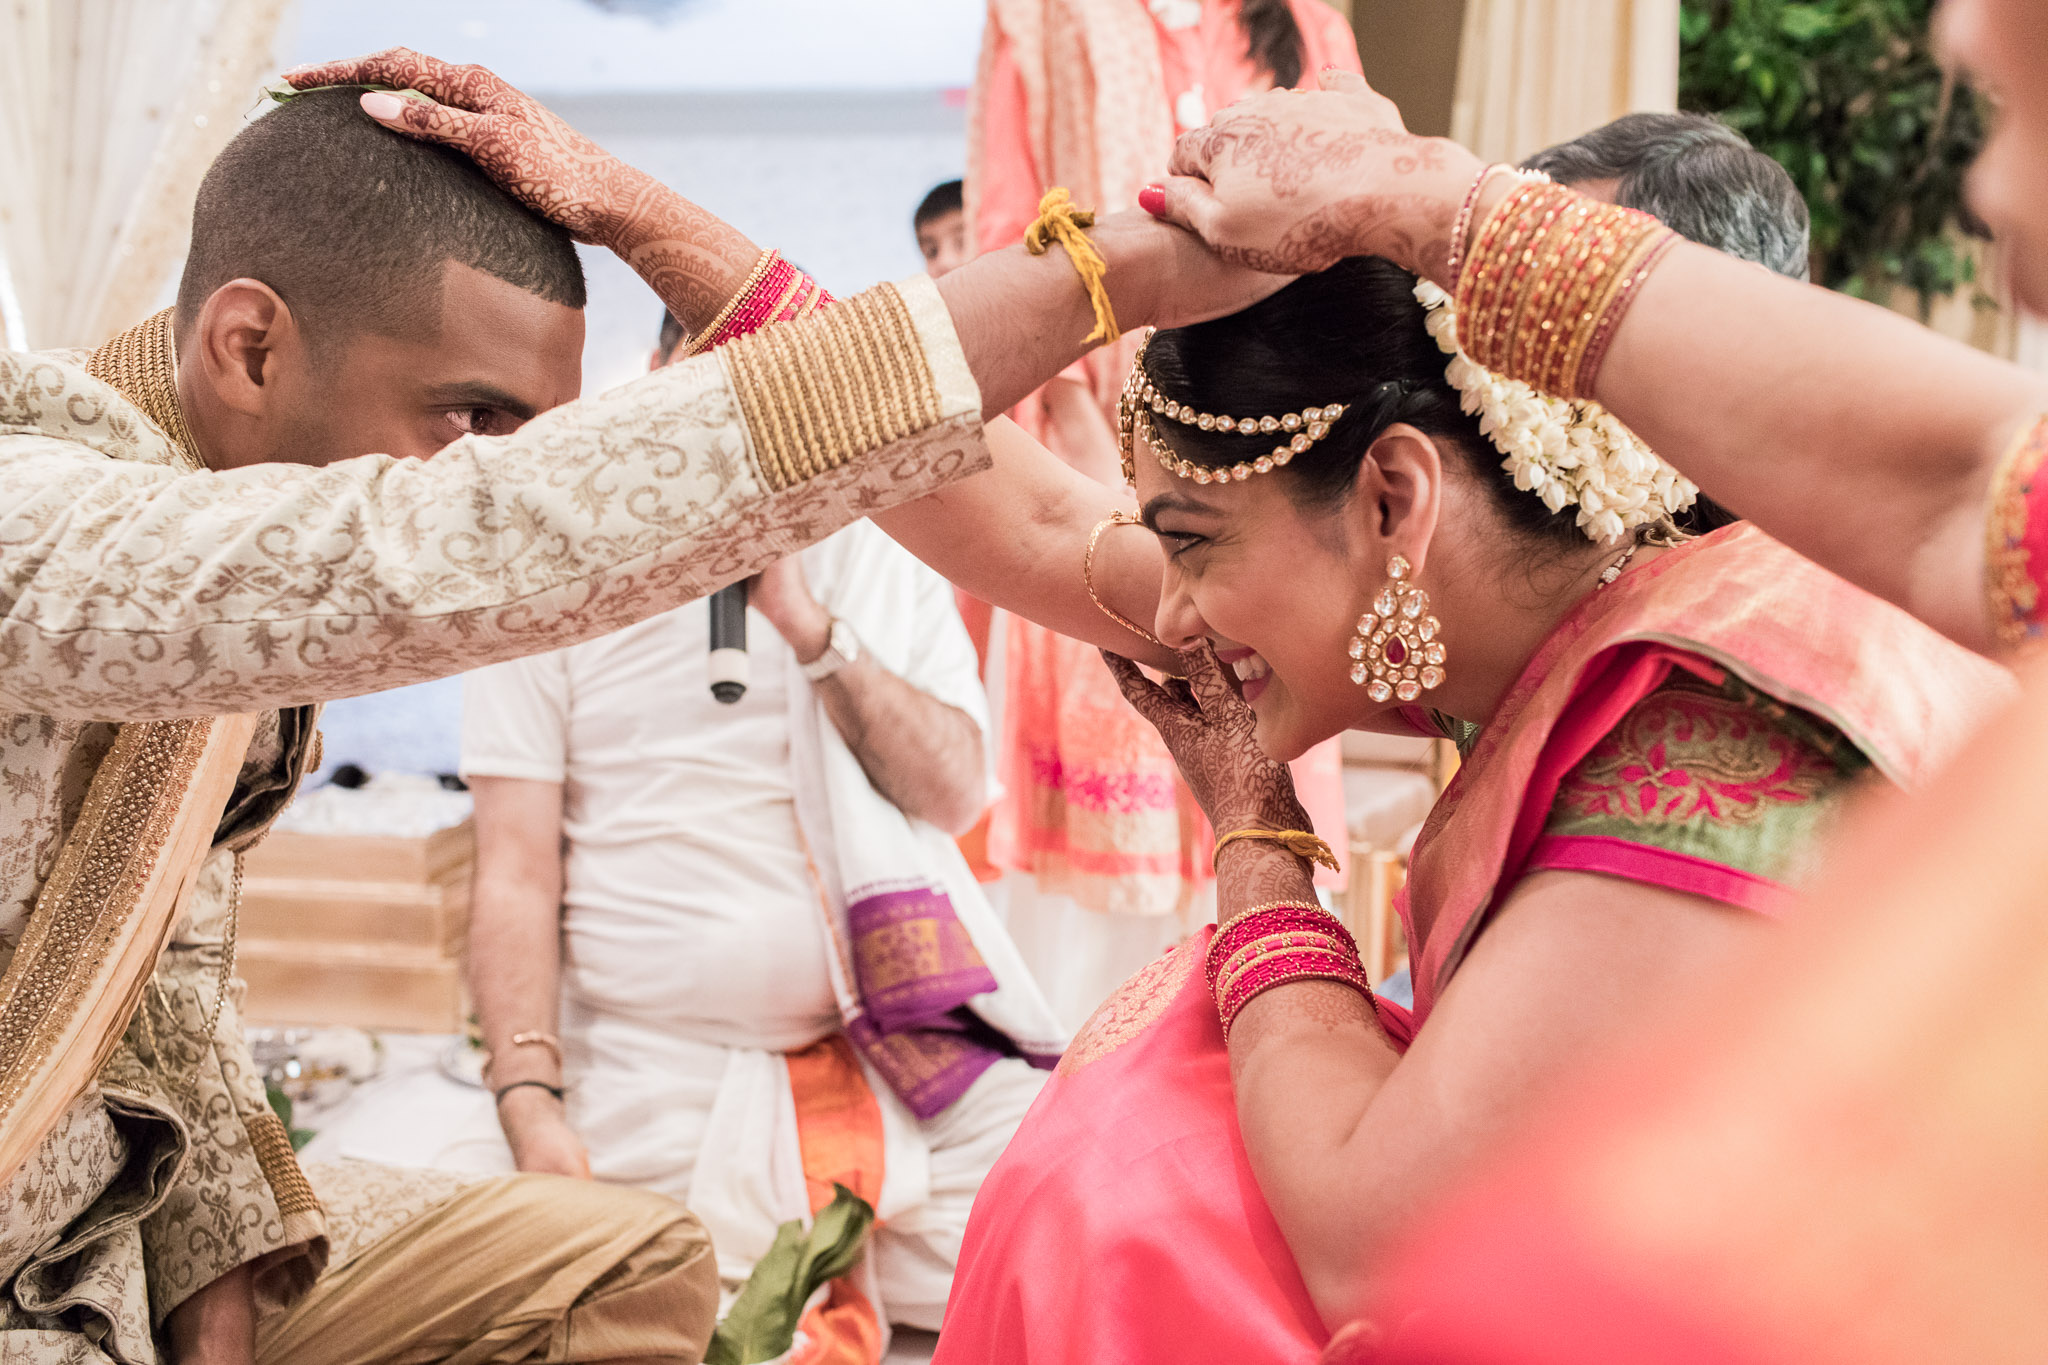 A wedding couple smile as they lay hands on each other's heads during a wedding ceremony.